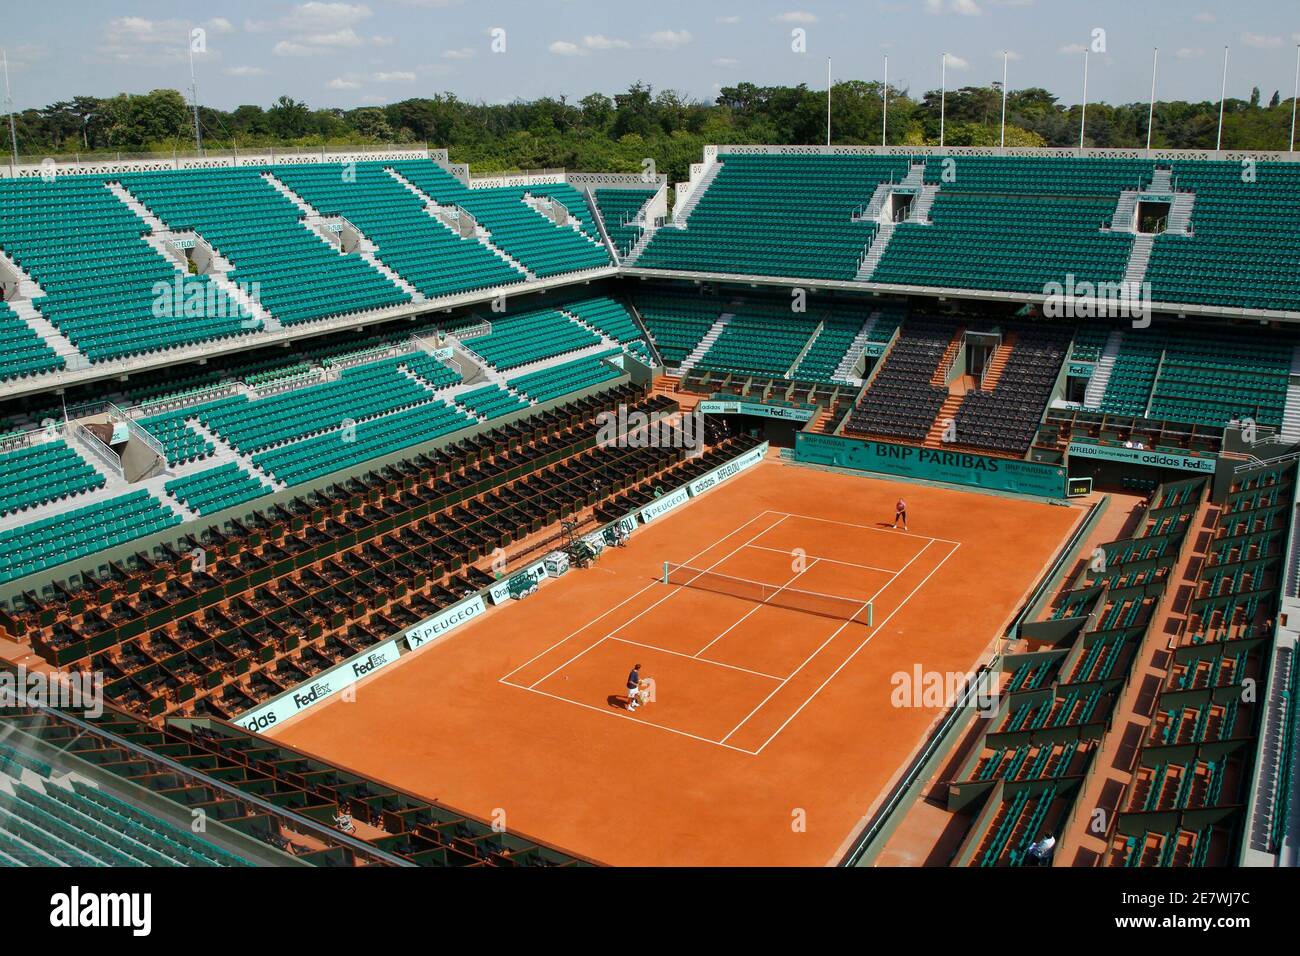 General view of the Philippe Chatrier central court before the start of the  2010 French Open tennis tournament at Roland Garros stadium in Paris May  18, 2010. The French Open will run